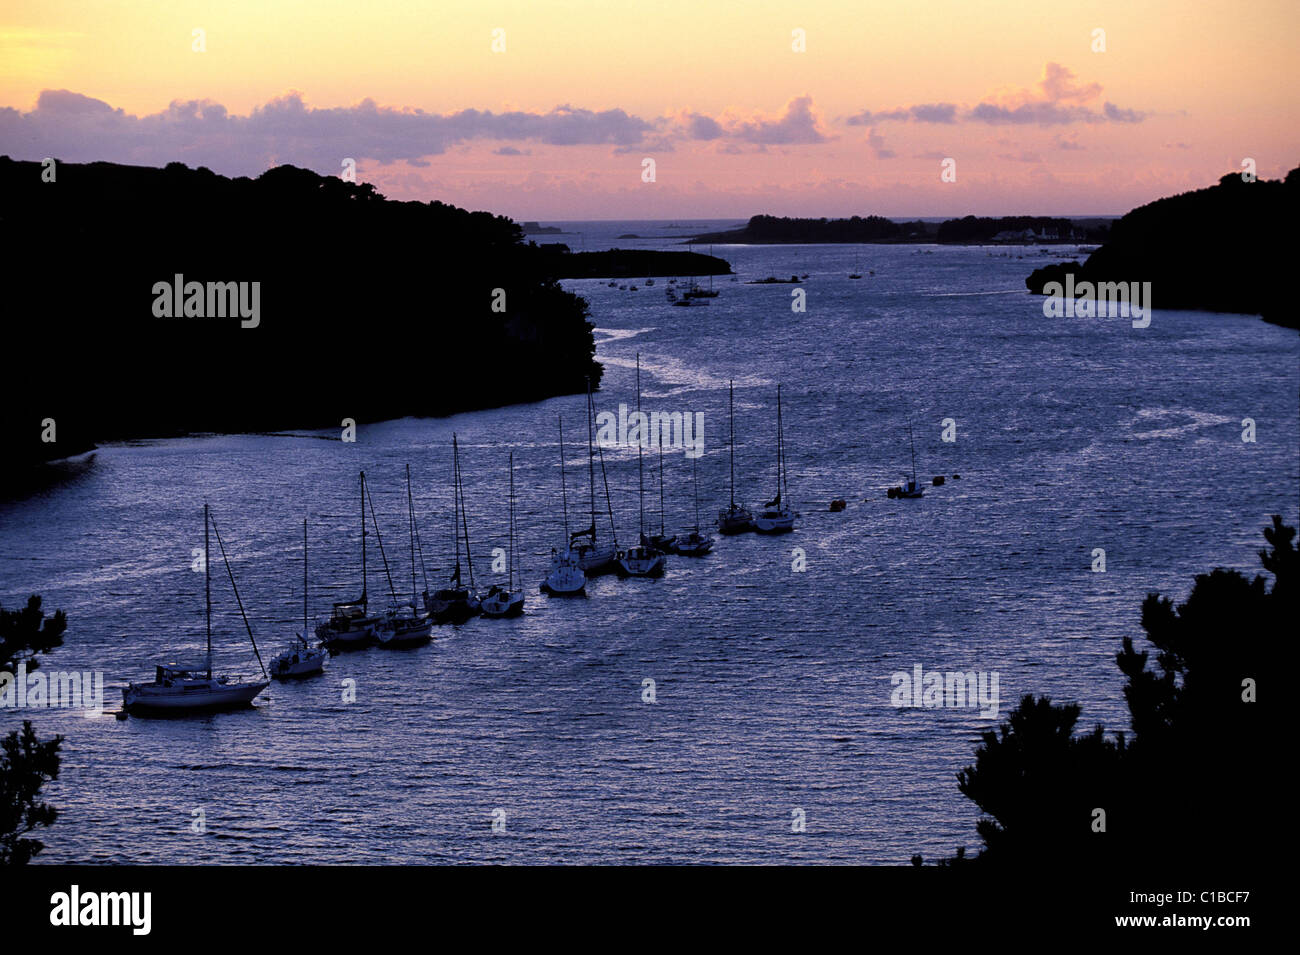 France, Finistere, Aber Wrac'h (loch), anchorage of sailboats Stock Photo